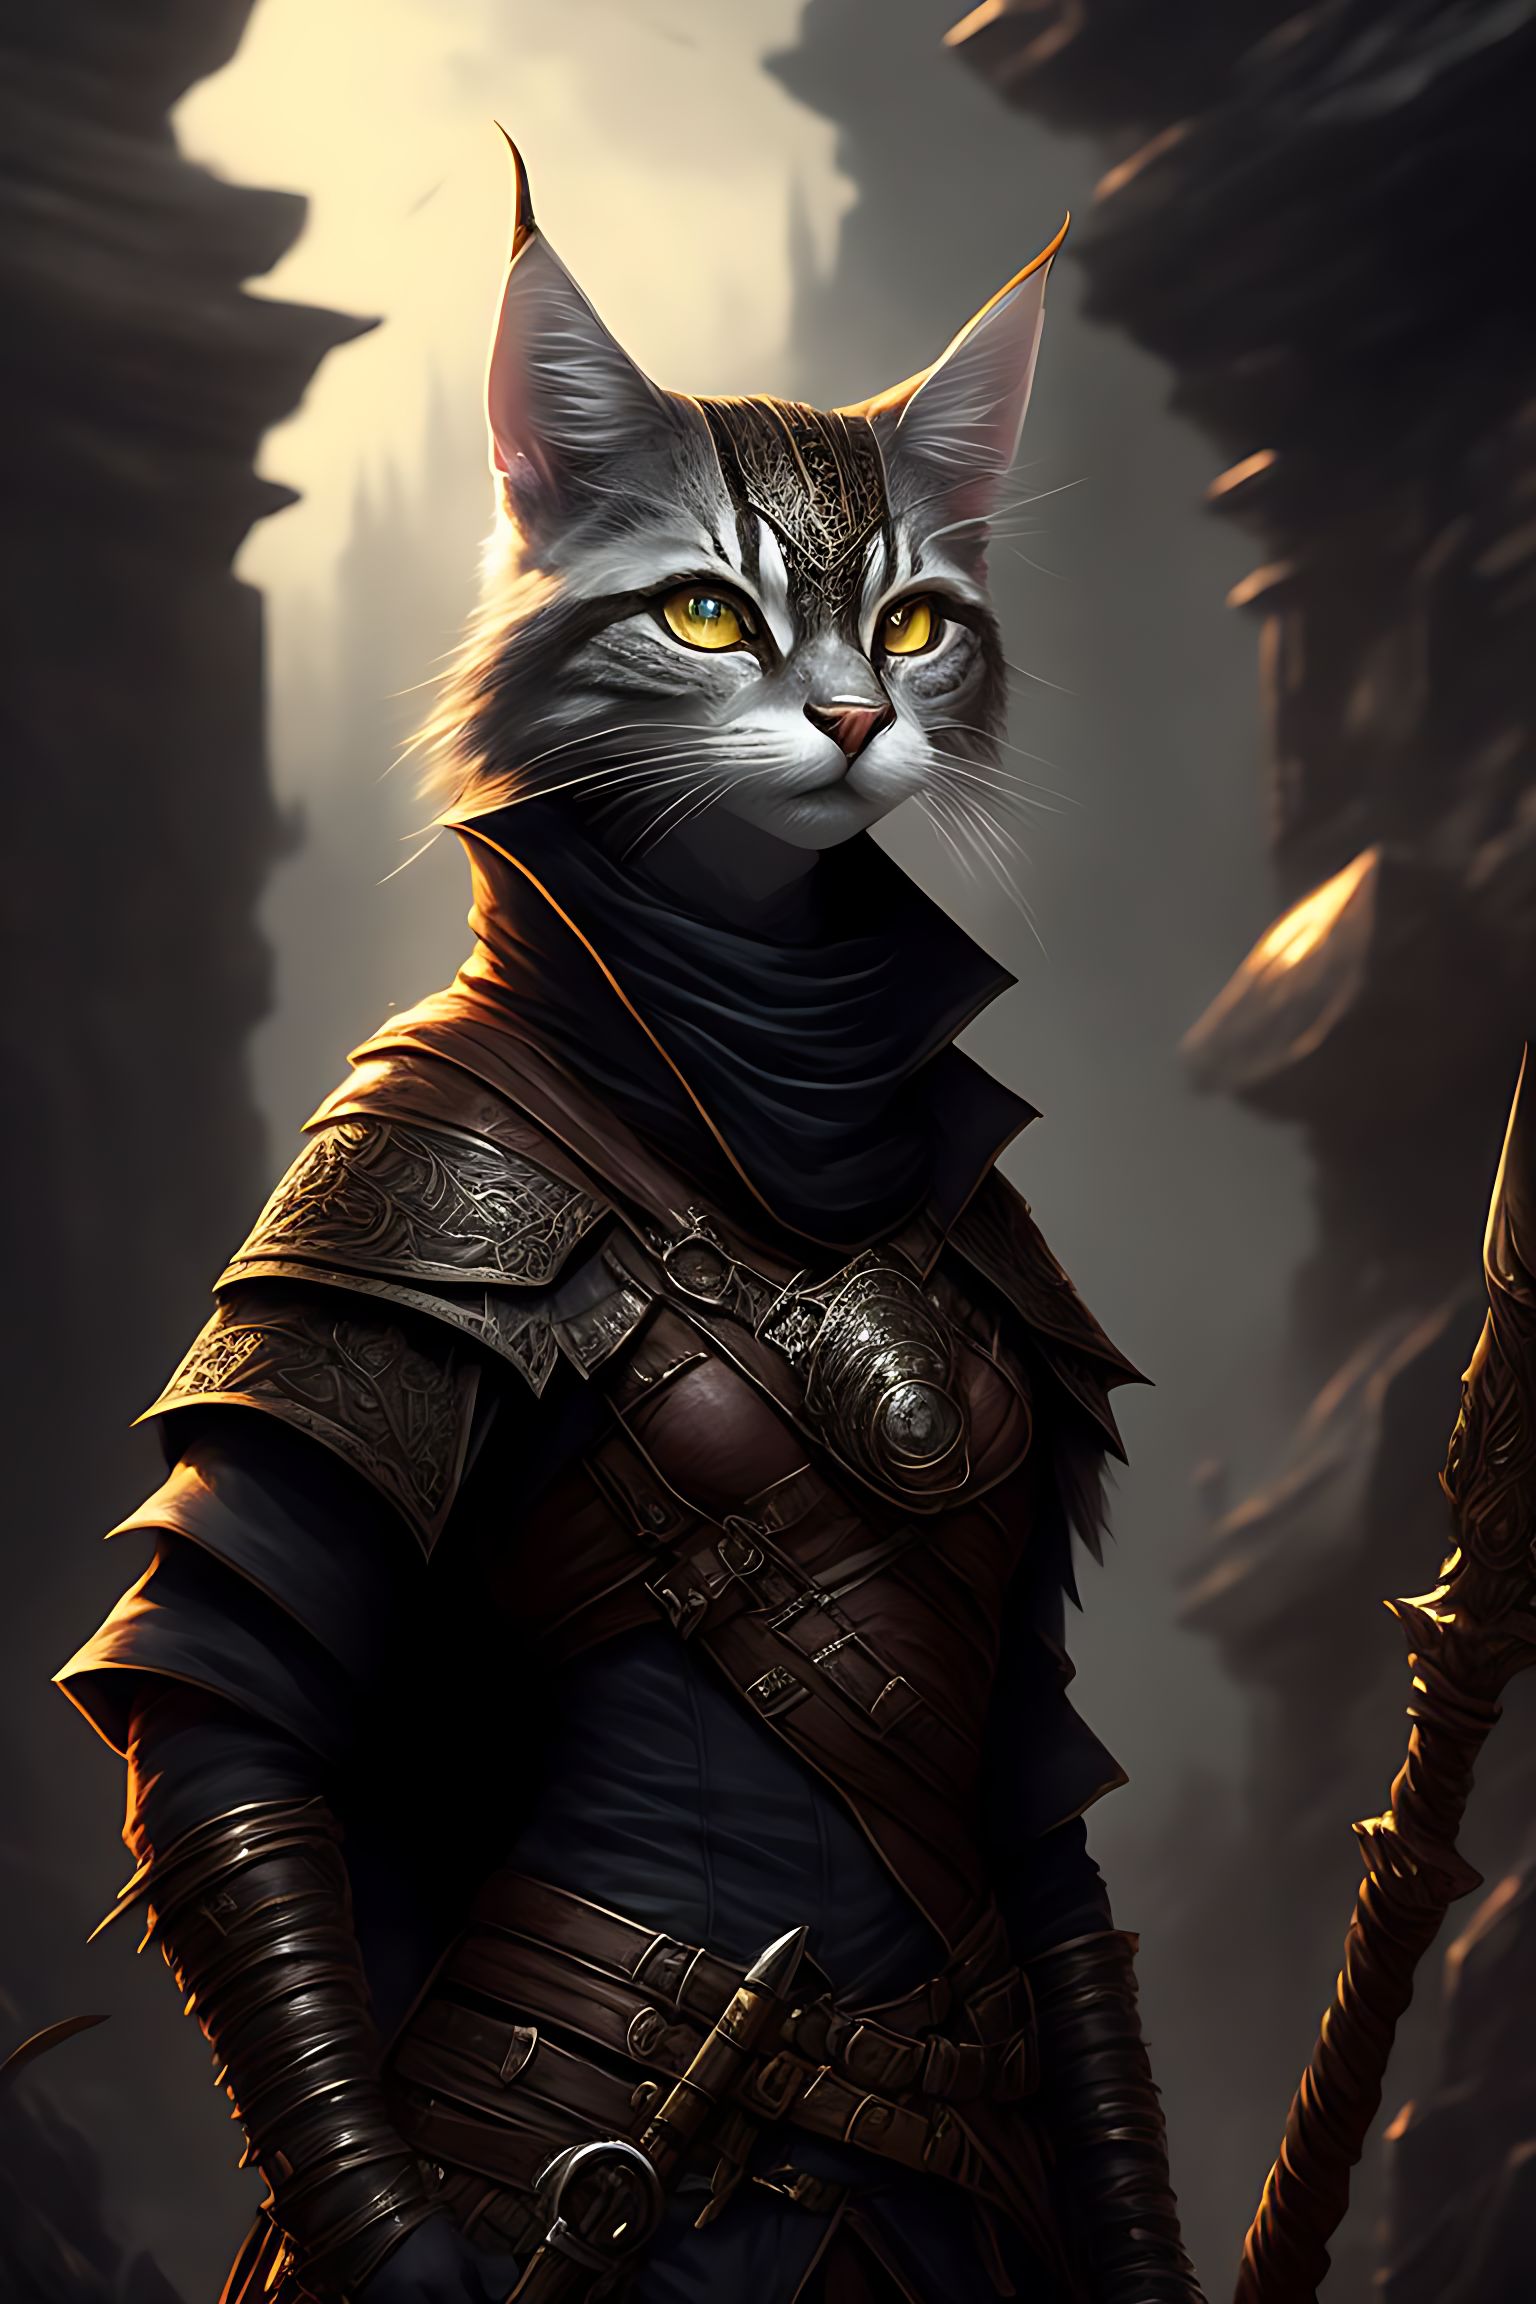 dungeons and dragons tabaxi rogue khajiit silver tabby traveler's basic clothes, illustrated in a dark and moody style with intricate details, highlighted by warm lighting and sharp focus, the artwork is reminiscent of classic fantasy concept art and is in the style of artists like magali villeneuve and rk post, Trending on Artstation, this digital painting is perfect for fans of rpgs and fantasy action.